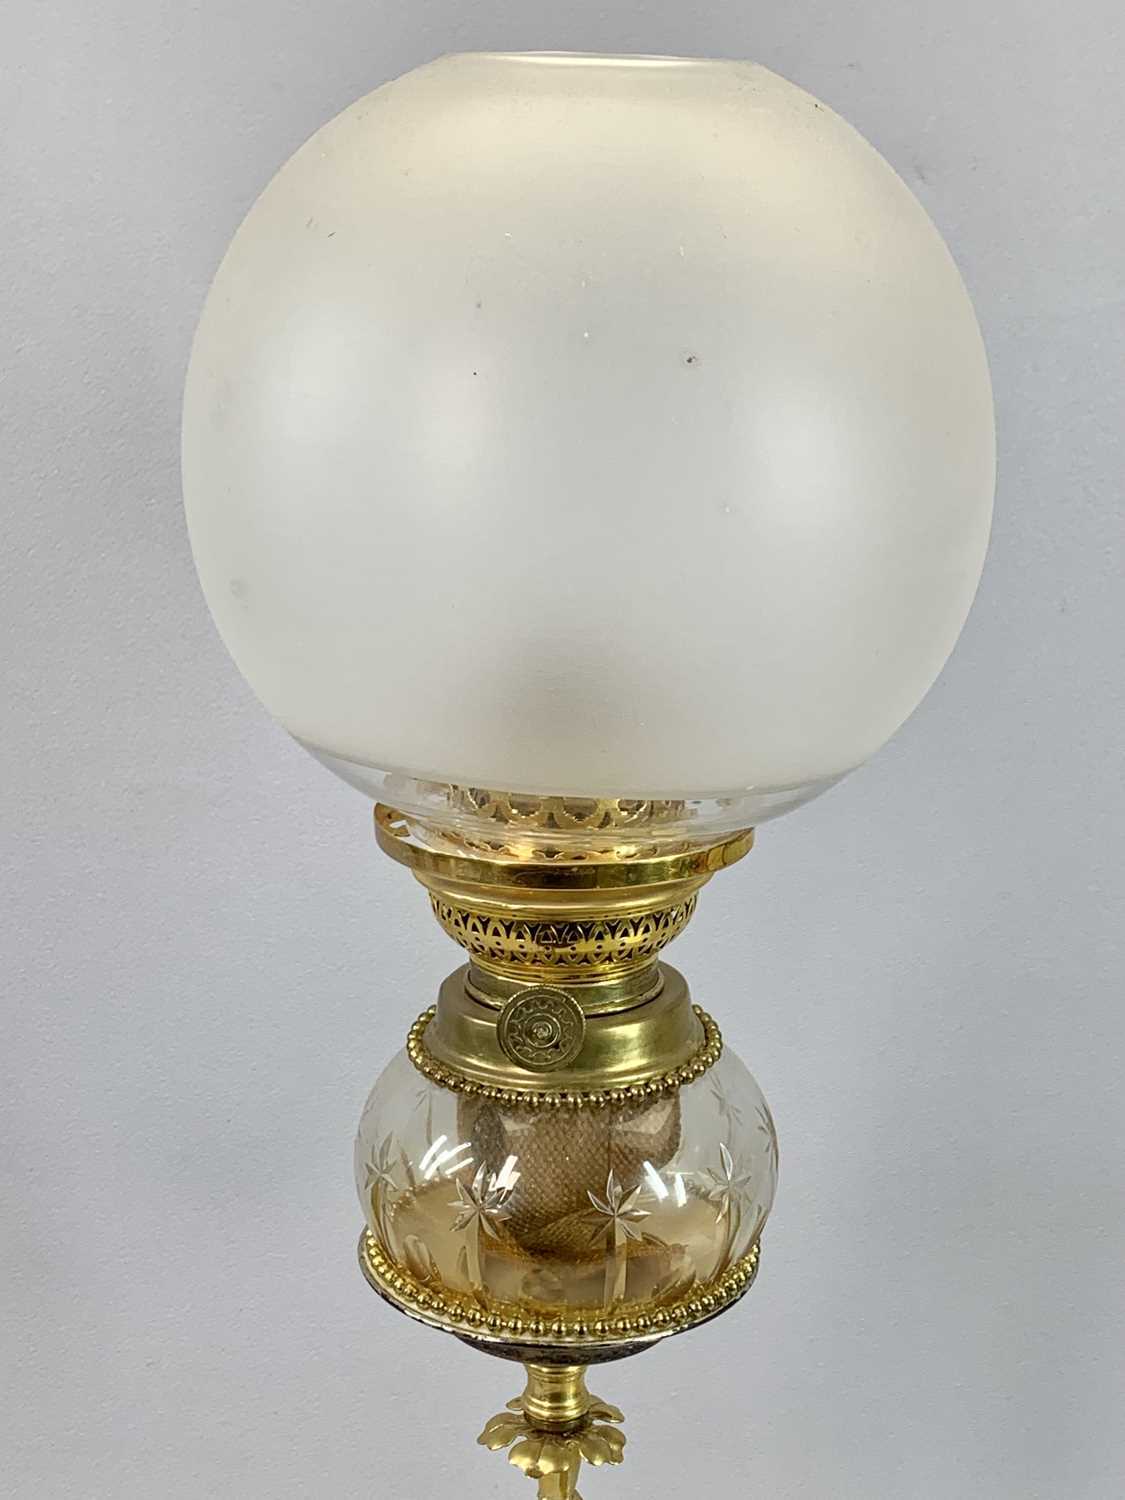 VICTORIAN GILDED BRASS OIL LAMP with figural column, clear glass reservoir with star cut decoration, - Image 2 of 2